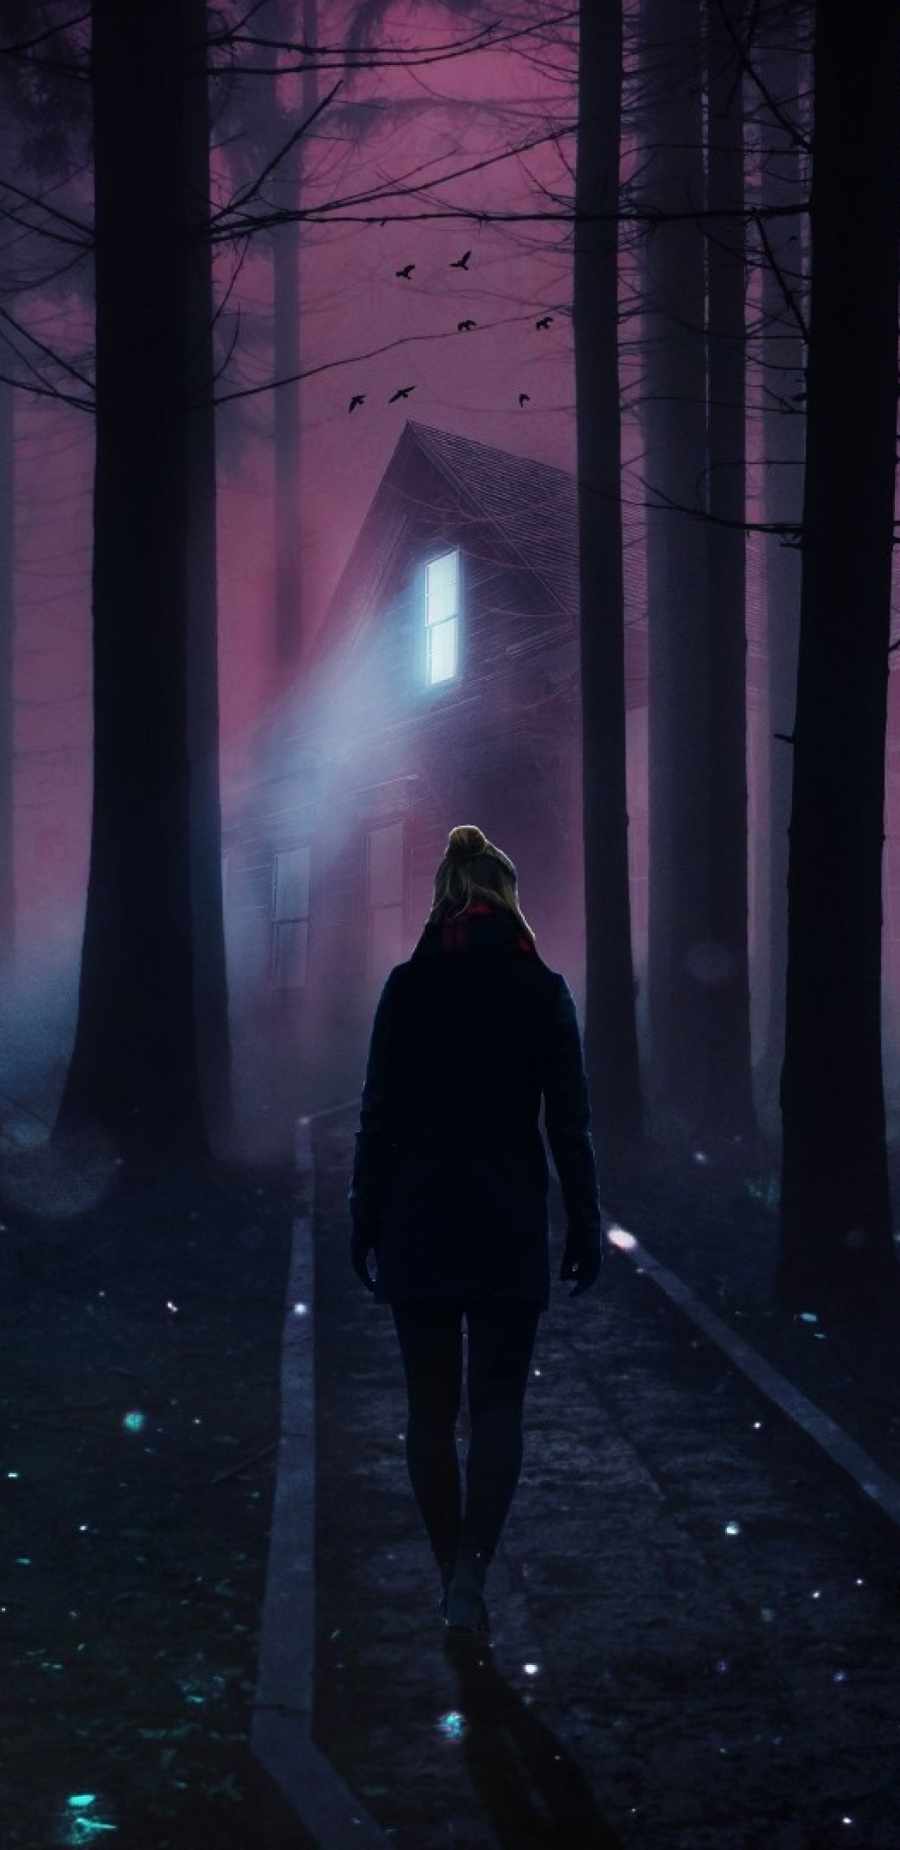 Alone in Woods iPhone Wallpaper